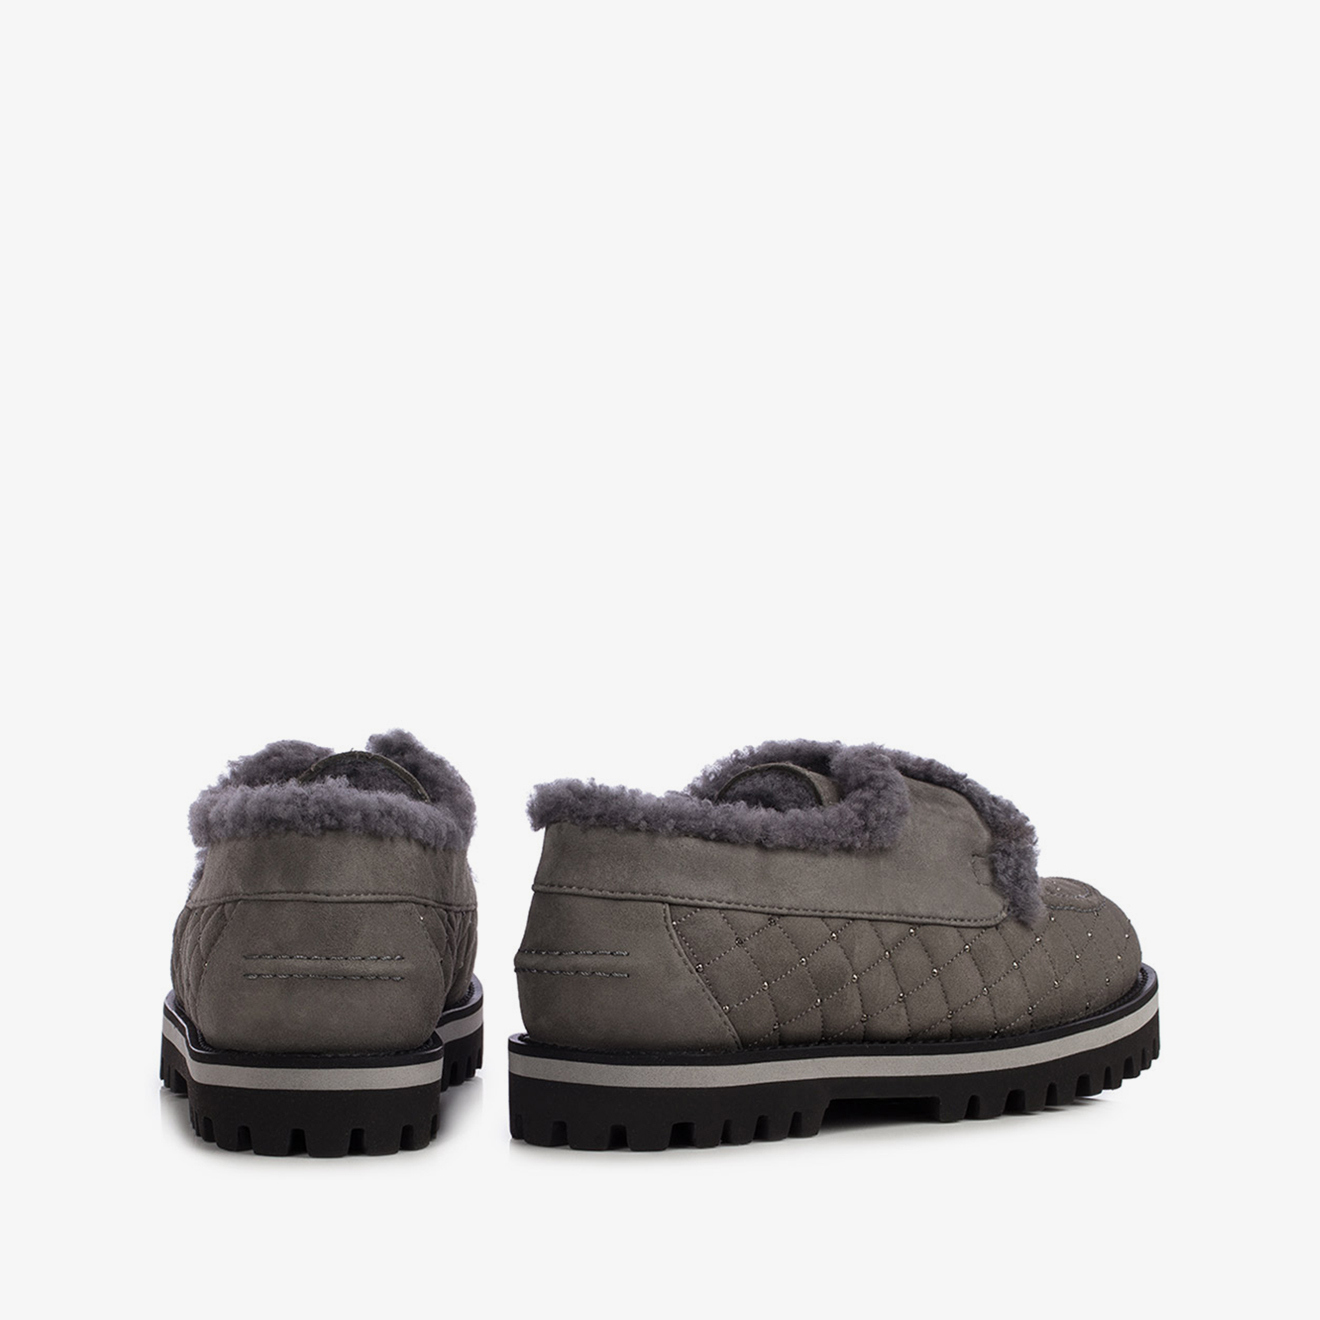 YACHT LOAFER fur inner lining - Le Silla official outlet